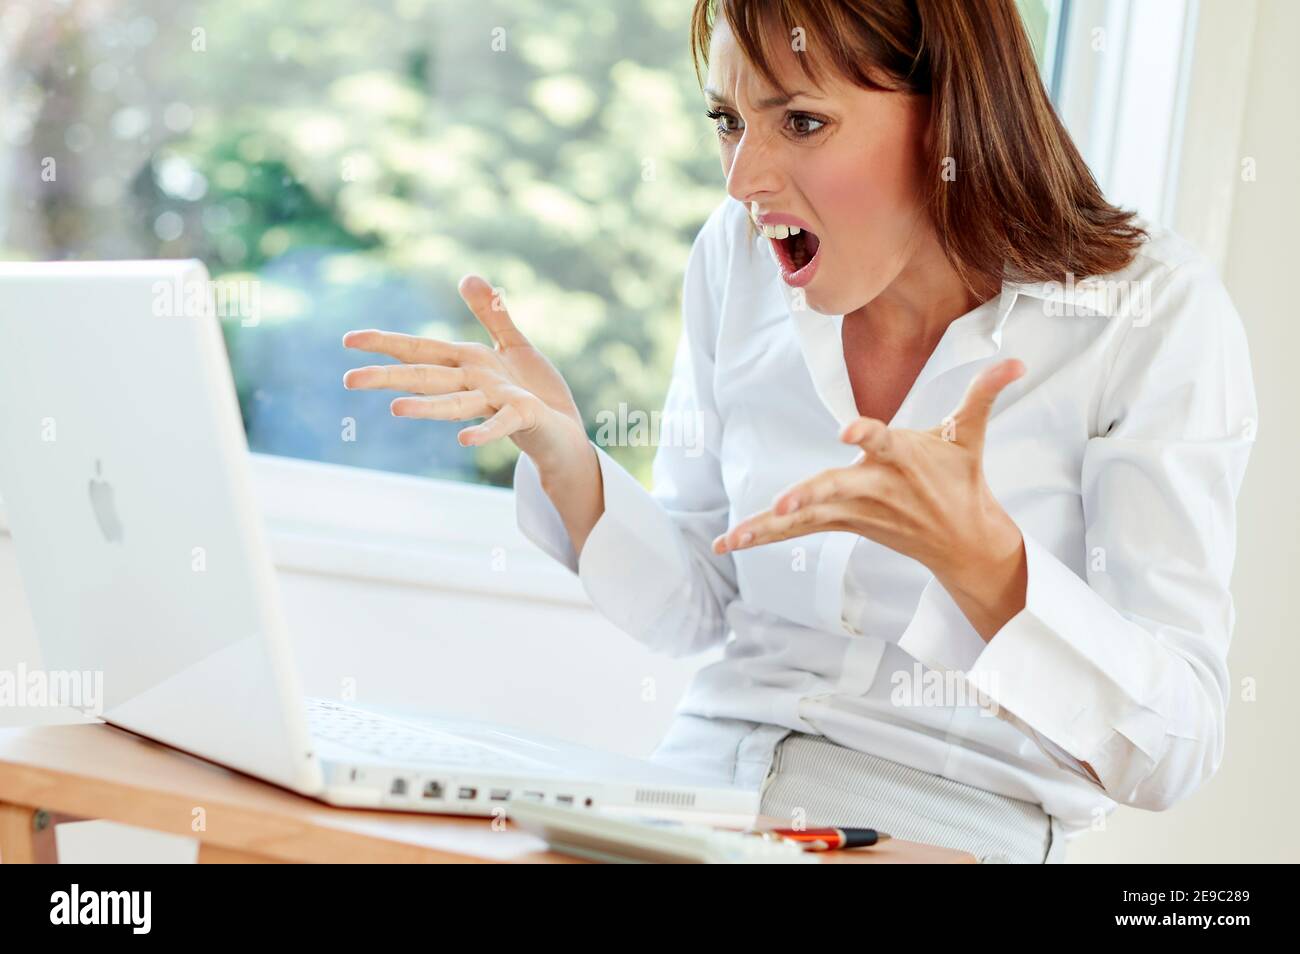 Stressed woman at work Stock Photo